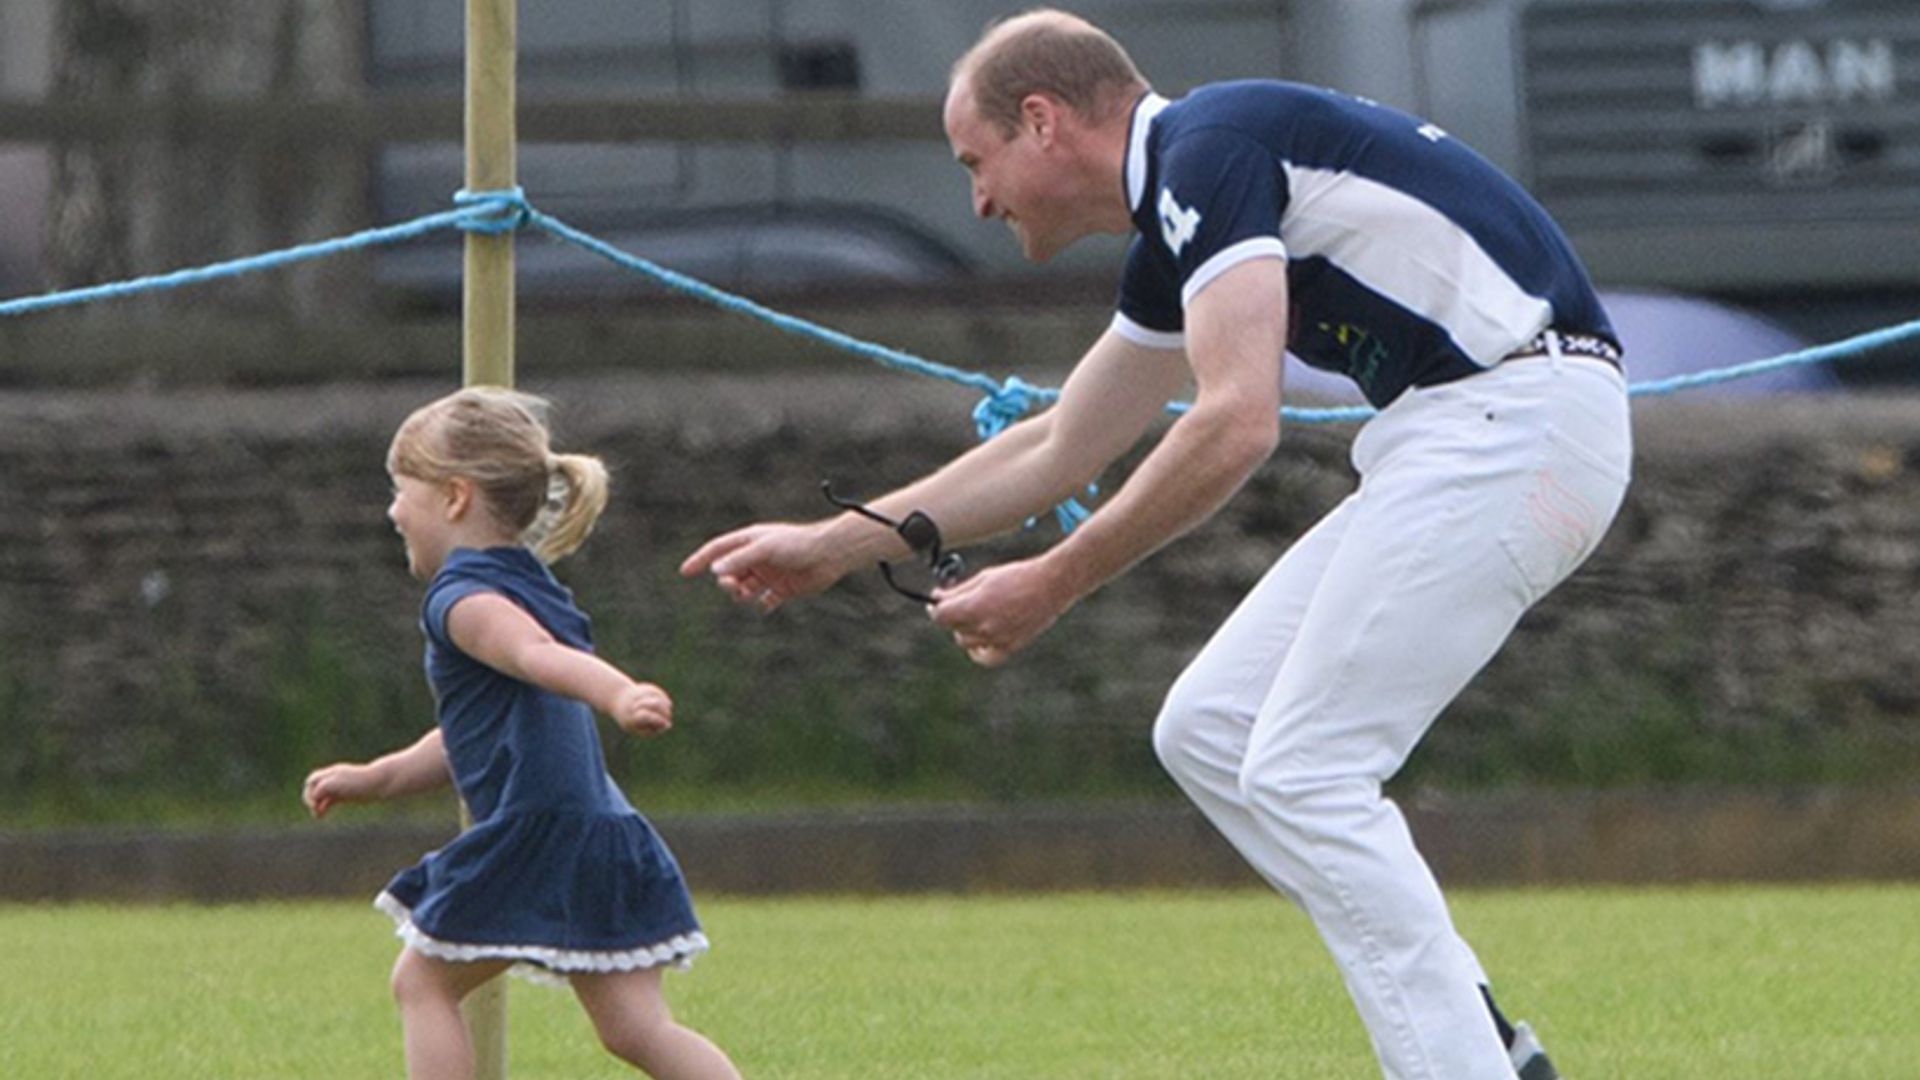 Prince William plays with adorable Mia Tindall at the polo - see the photos!